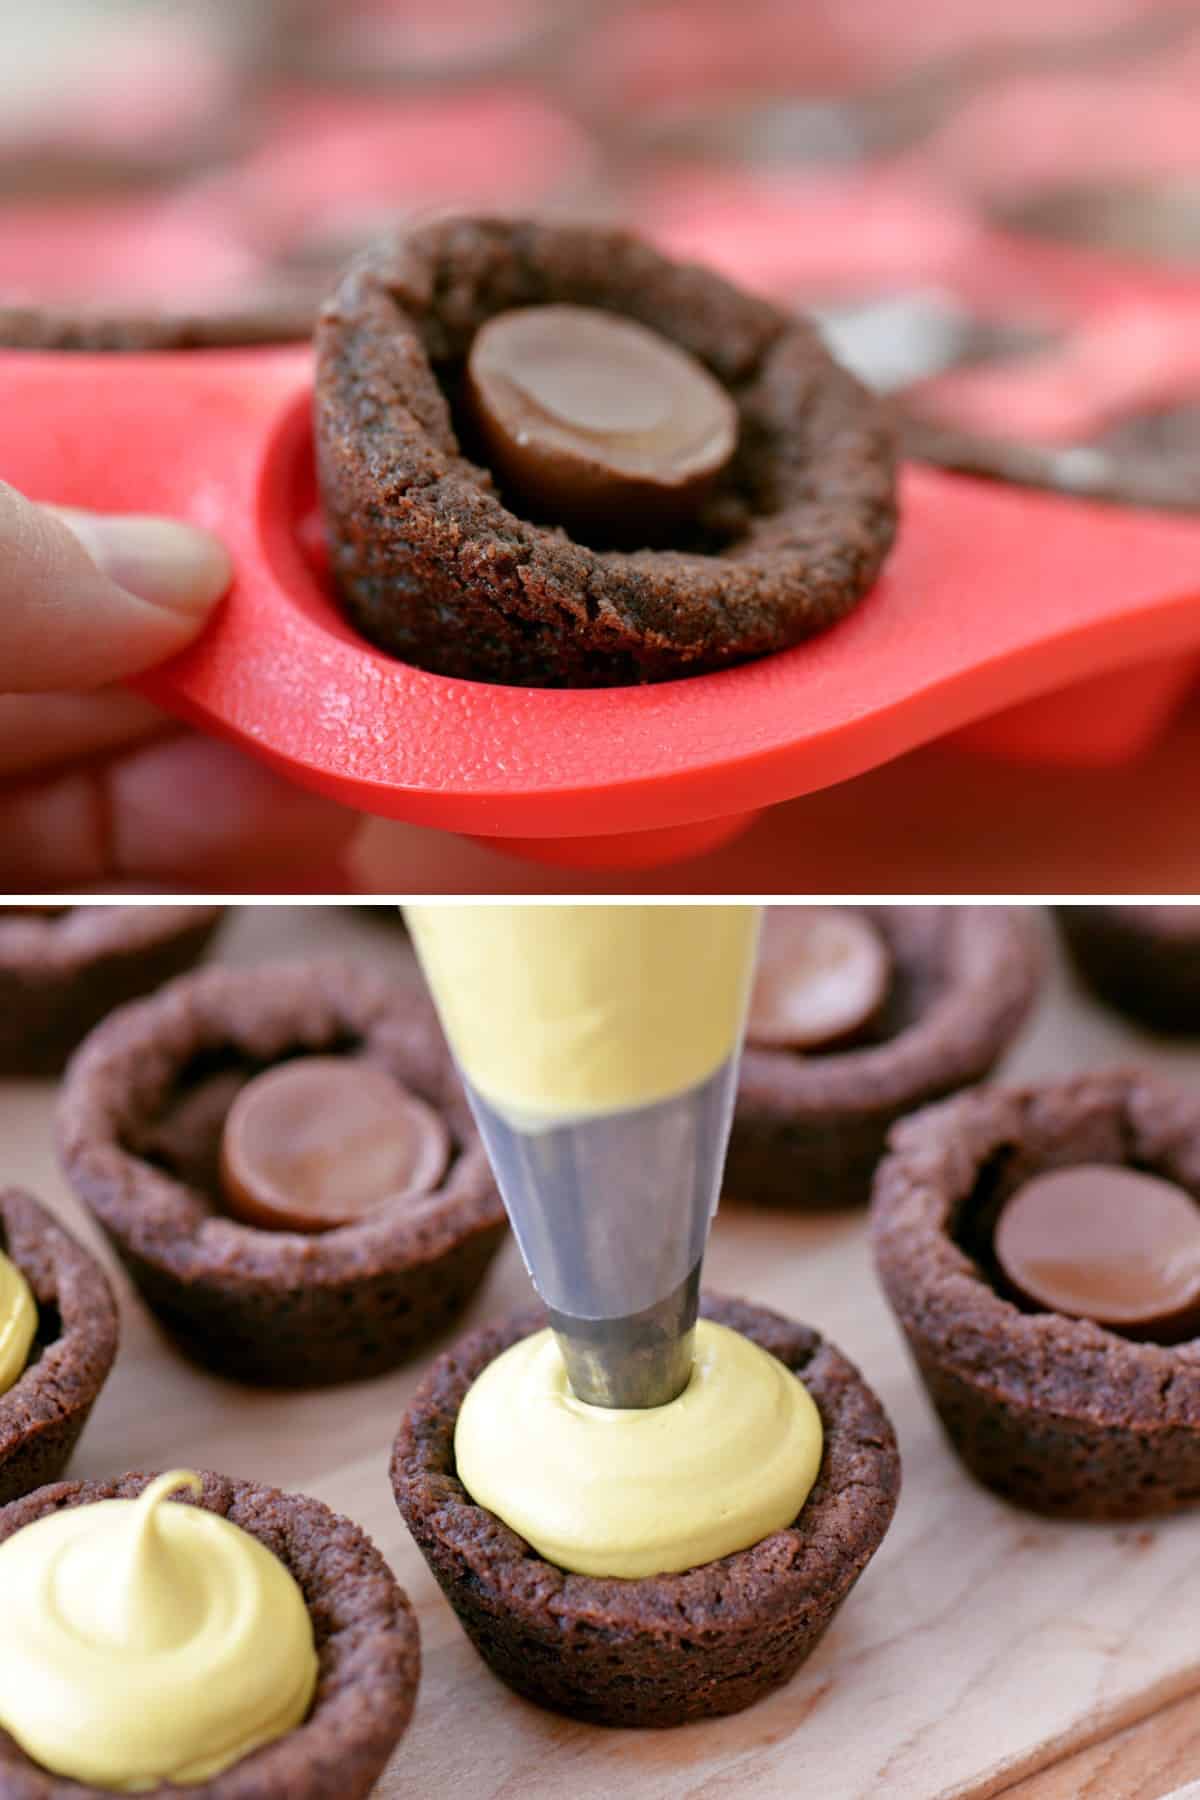 Fill the cookie cups with gold buttercream frosting.